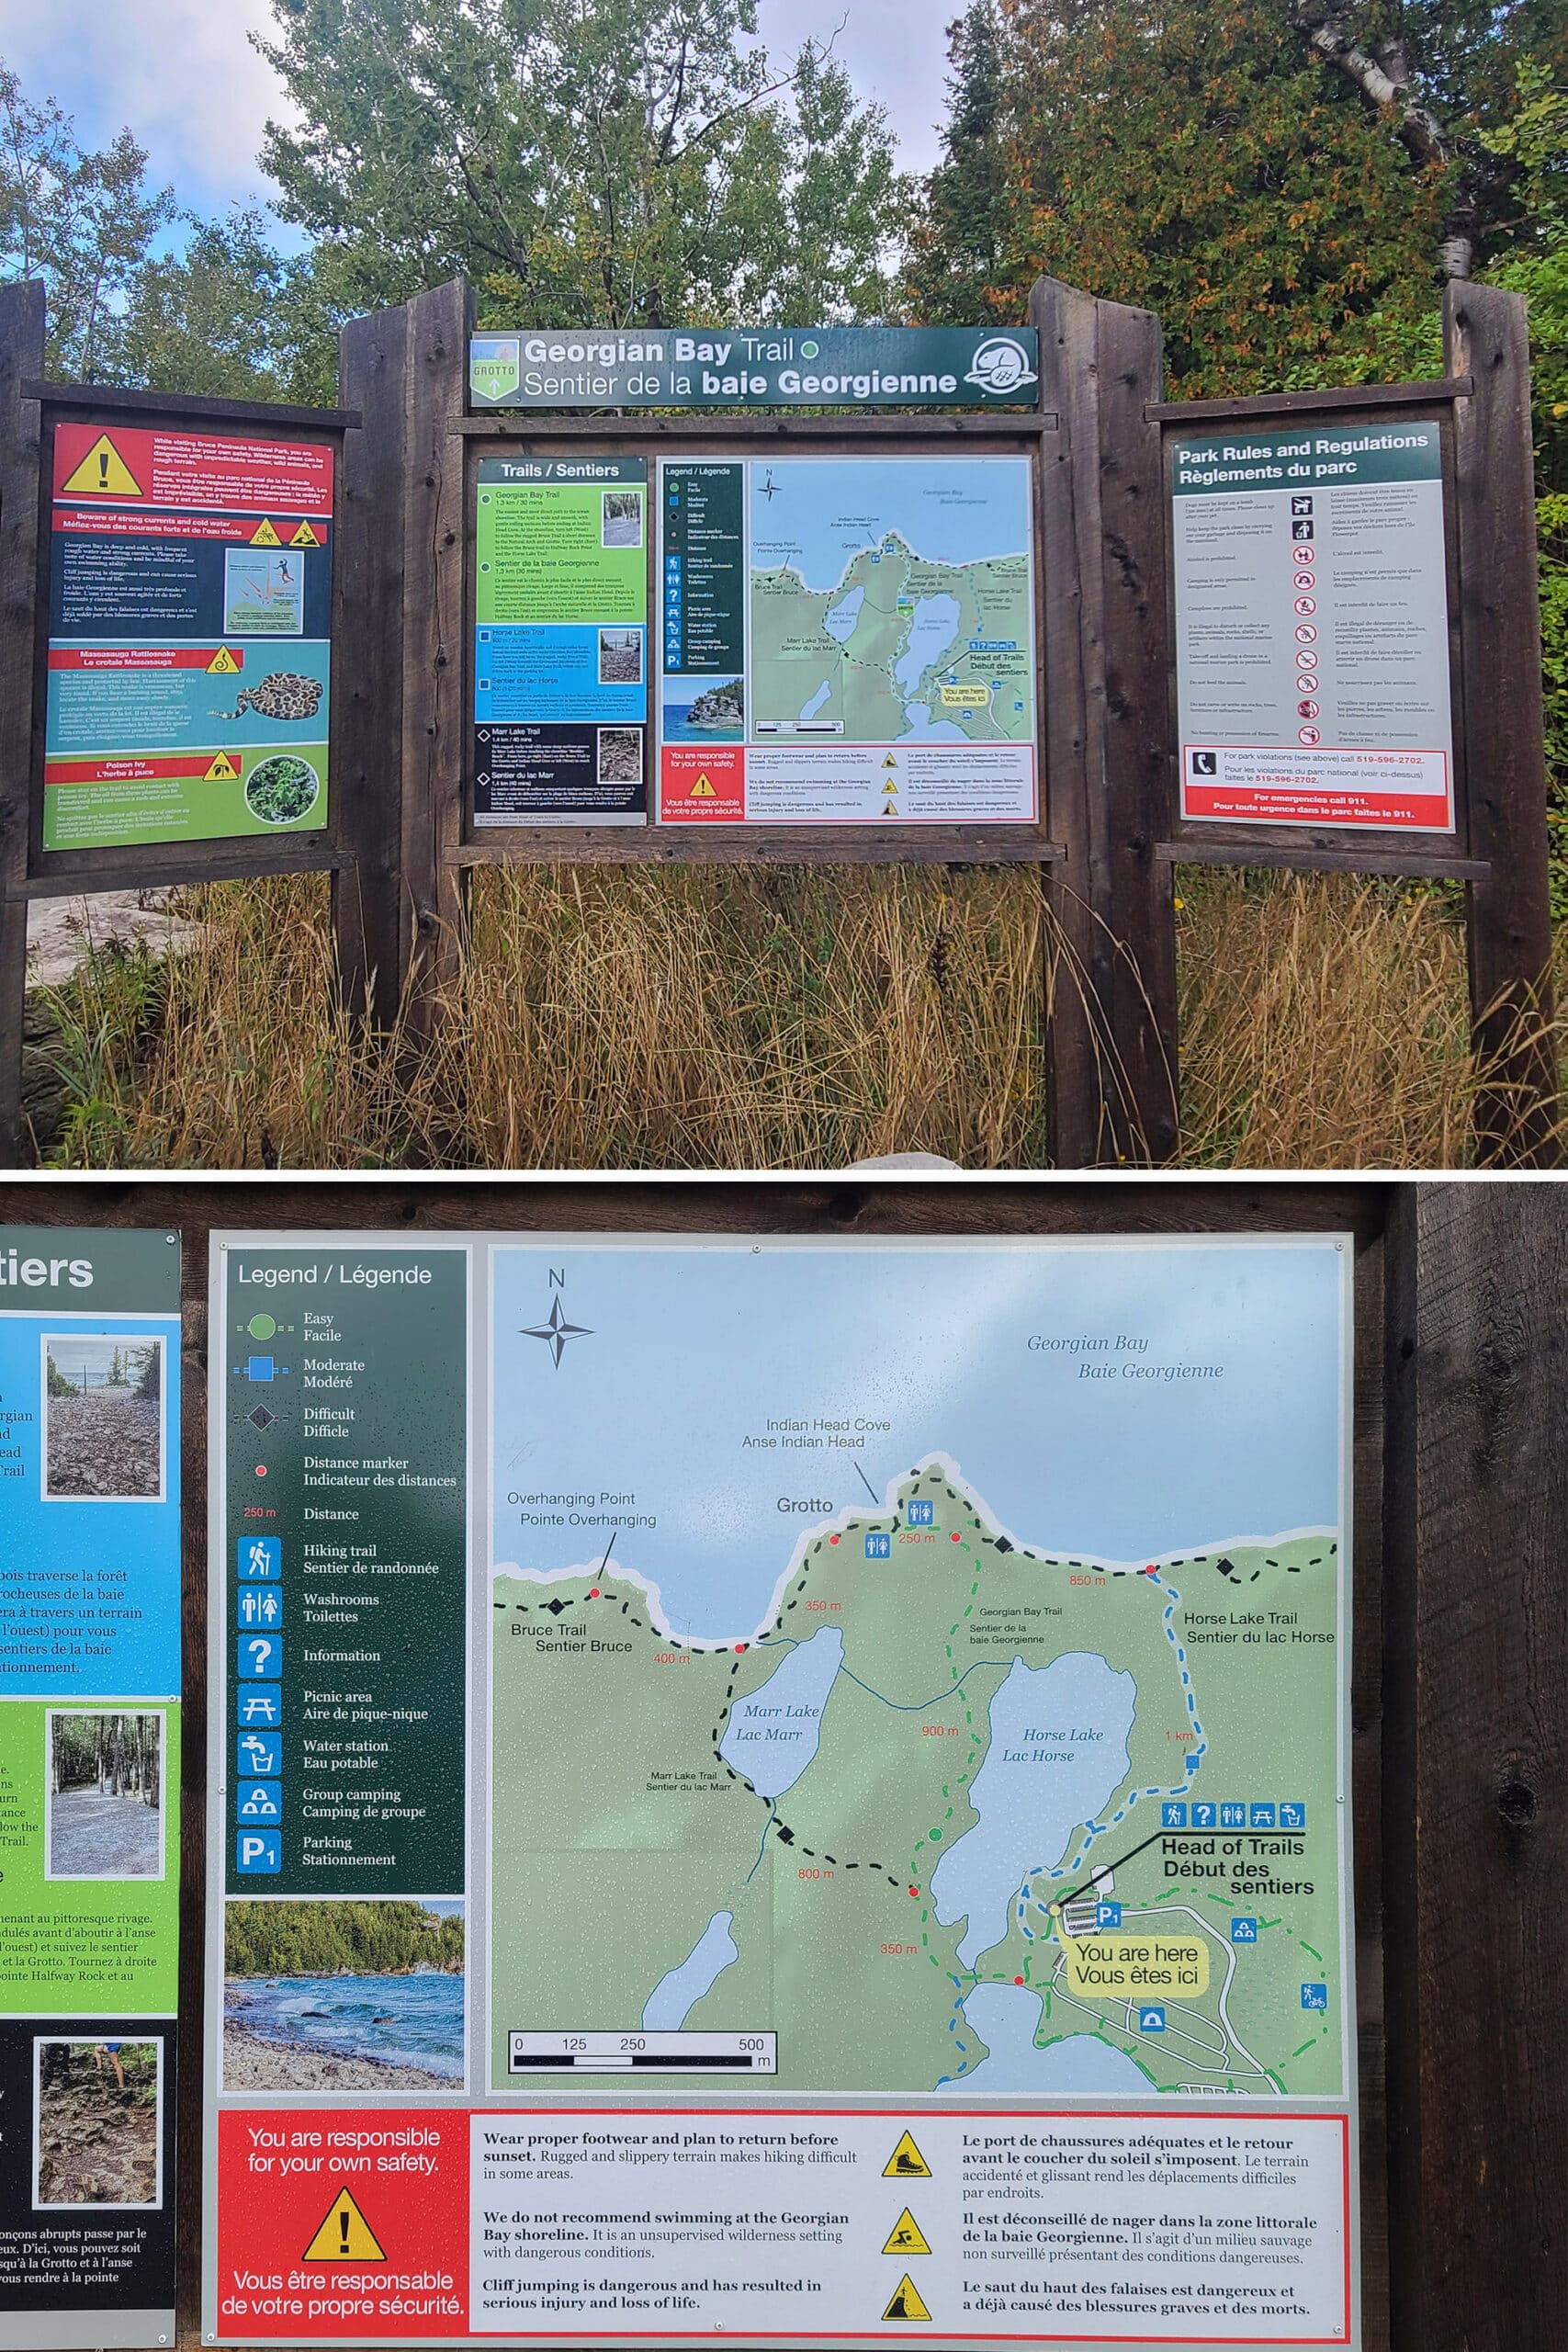 2 part image showing trailhead signage at the head of trails, with a map of Georgian Bat trail.